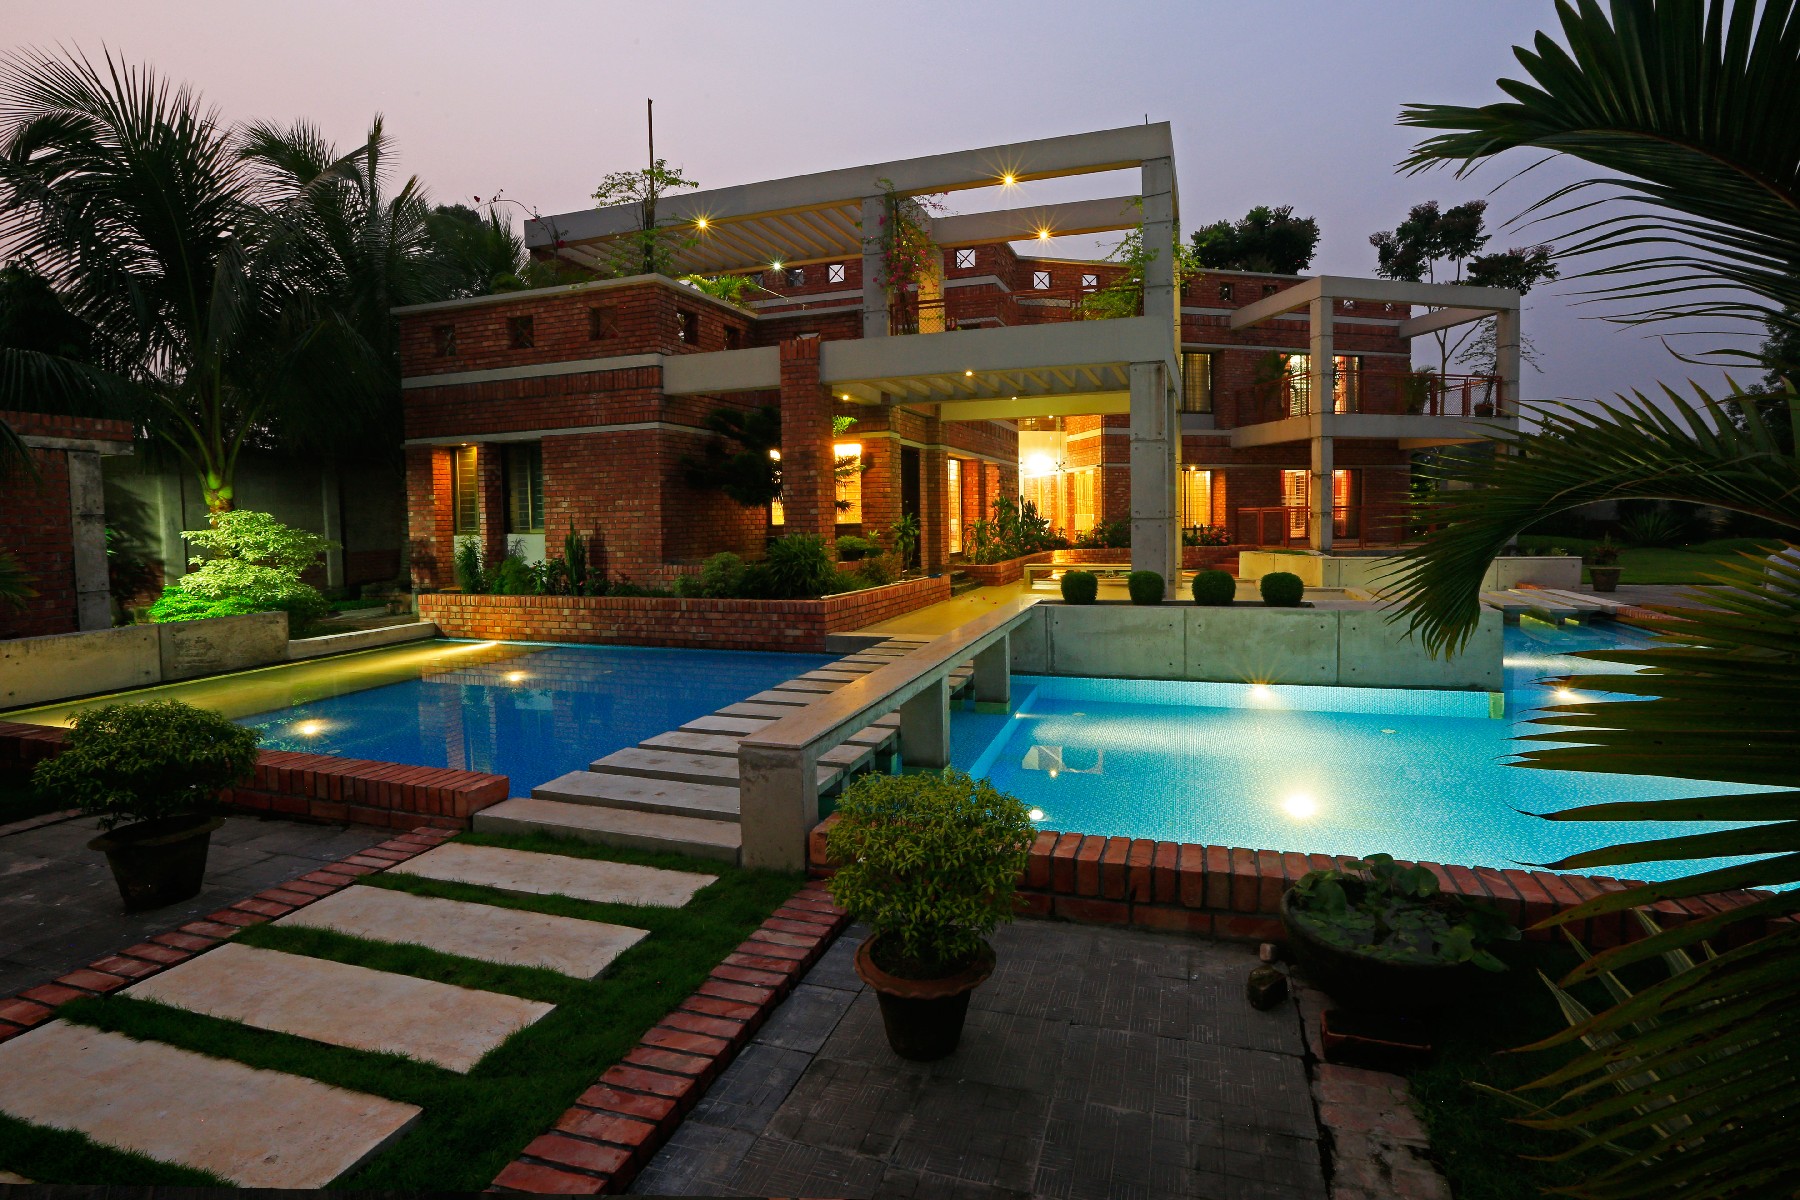 Vacation House at Gajipur | MW3 Design +Partners